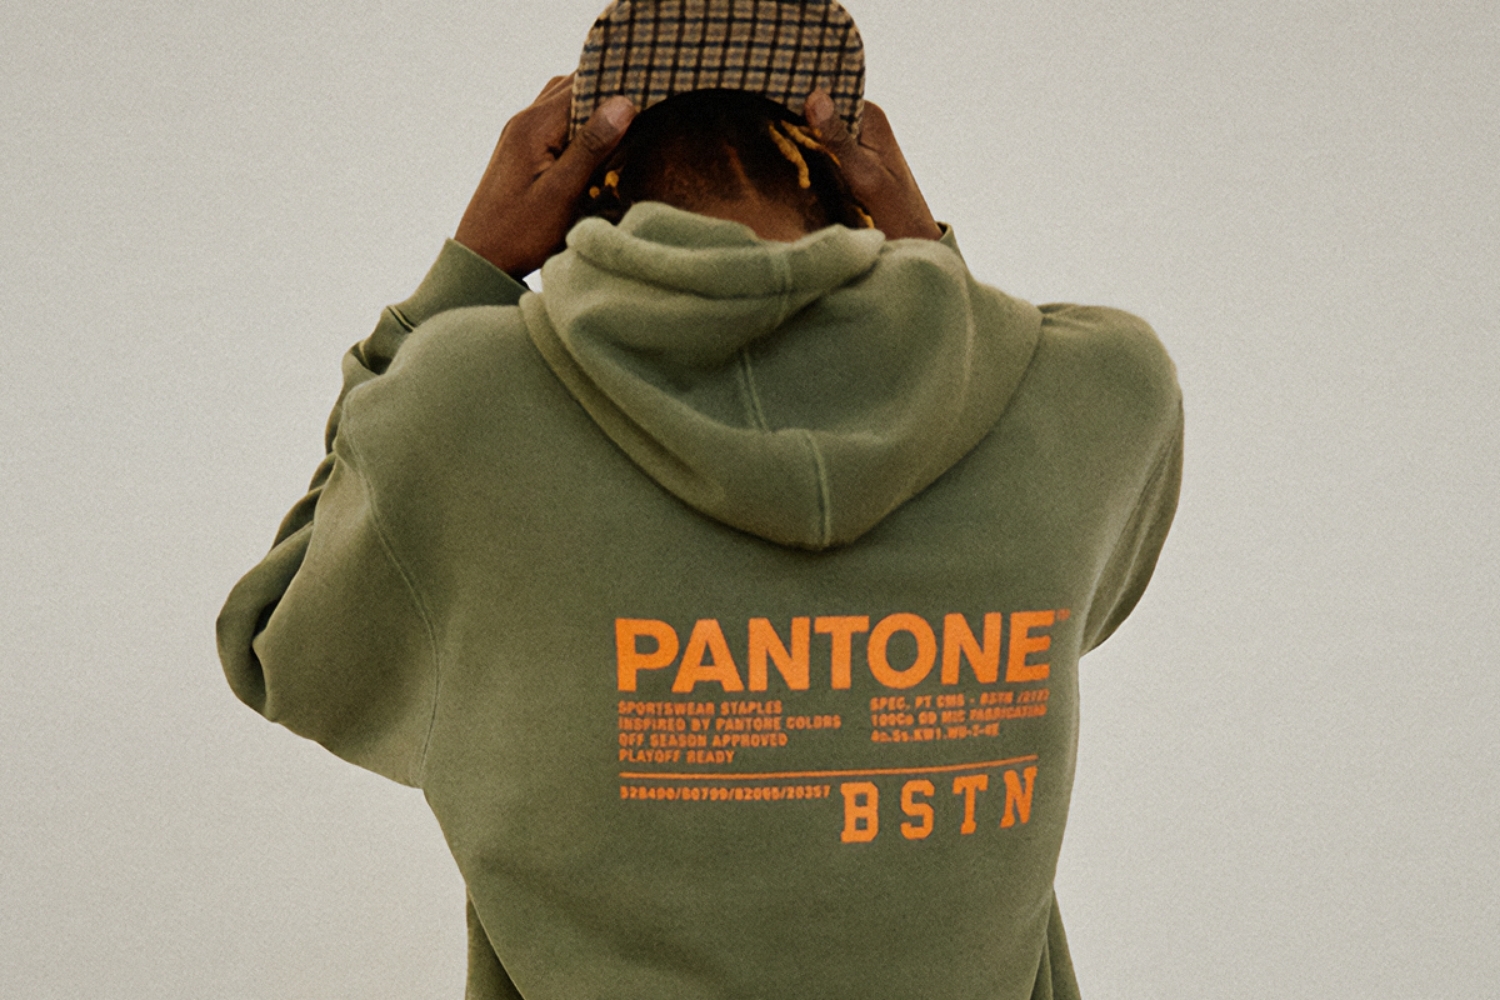 Finest Streetwear in the BSTN x Pantone Collection 2021